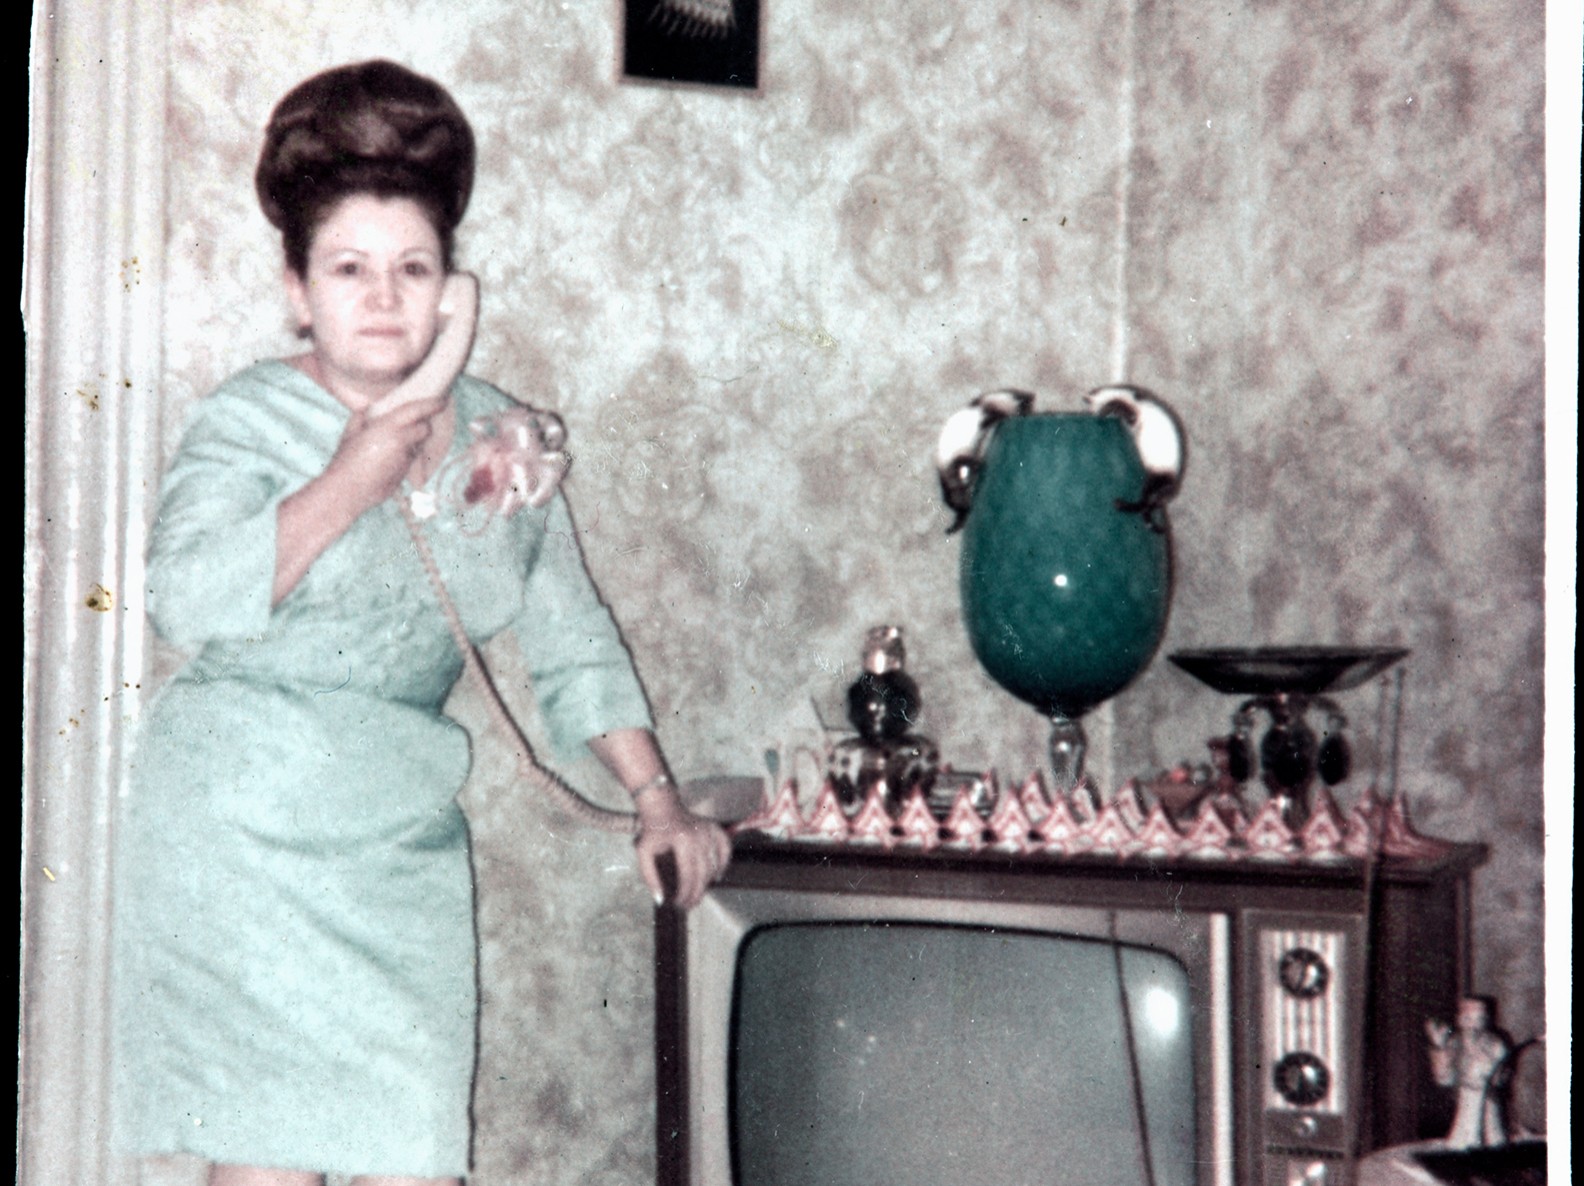 Ramonita Saez in a pastel green dress with a beehive hairstyle stands next to a TV while speaking on the phone.